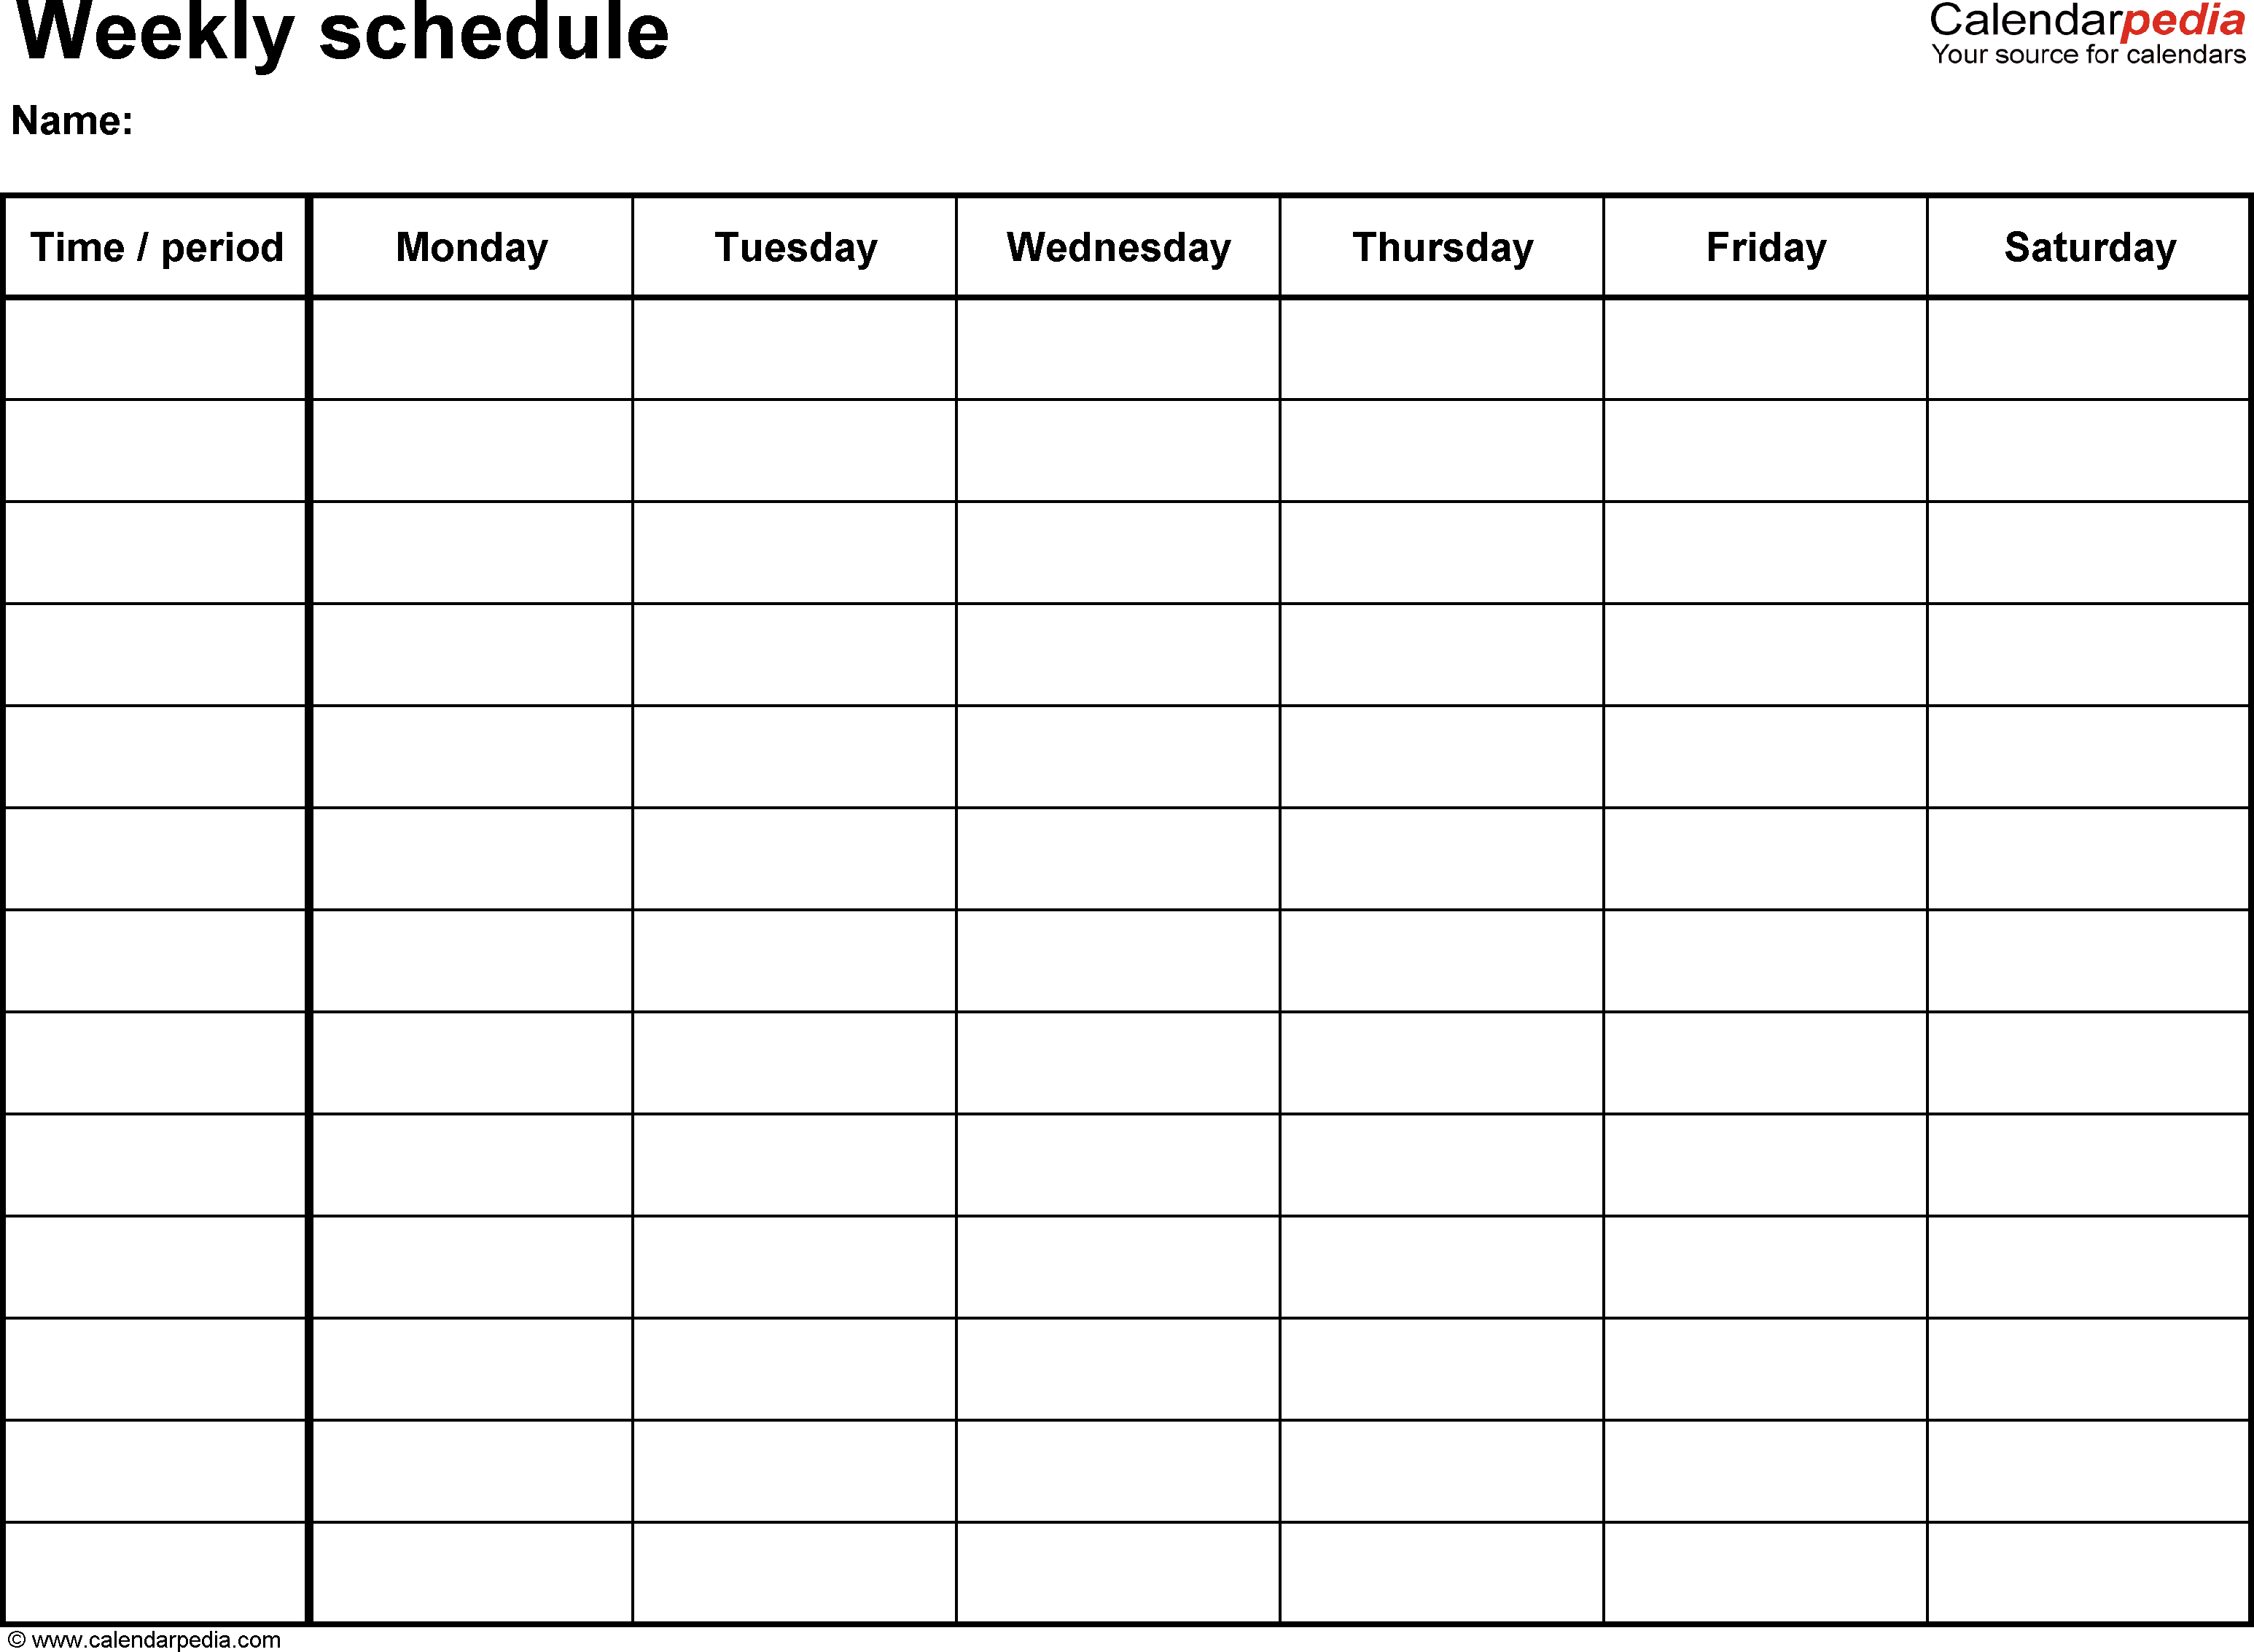 Free Weekly Schedule Templates For Pdf - 18 Templates - Free Printable Appointment Sheets